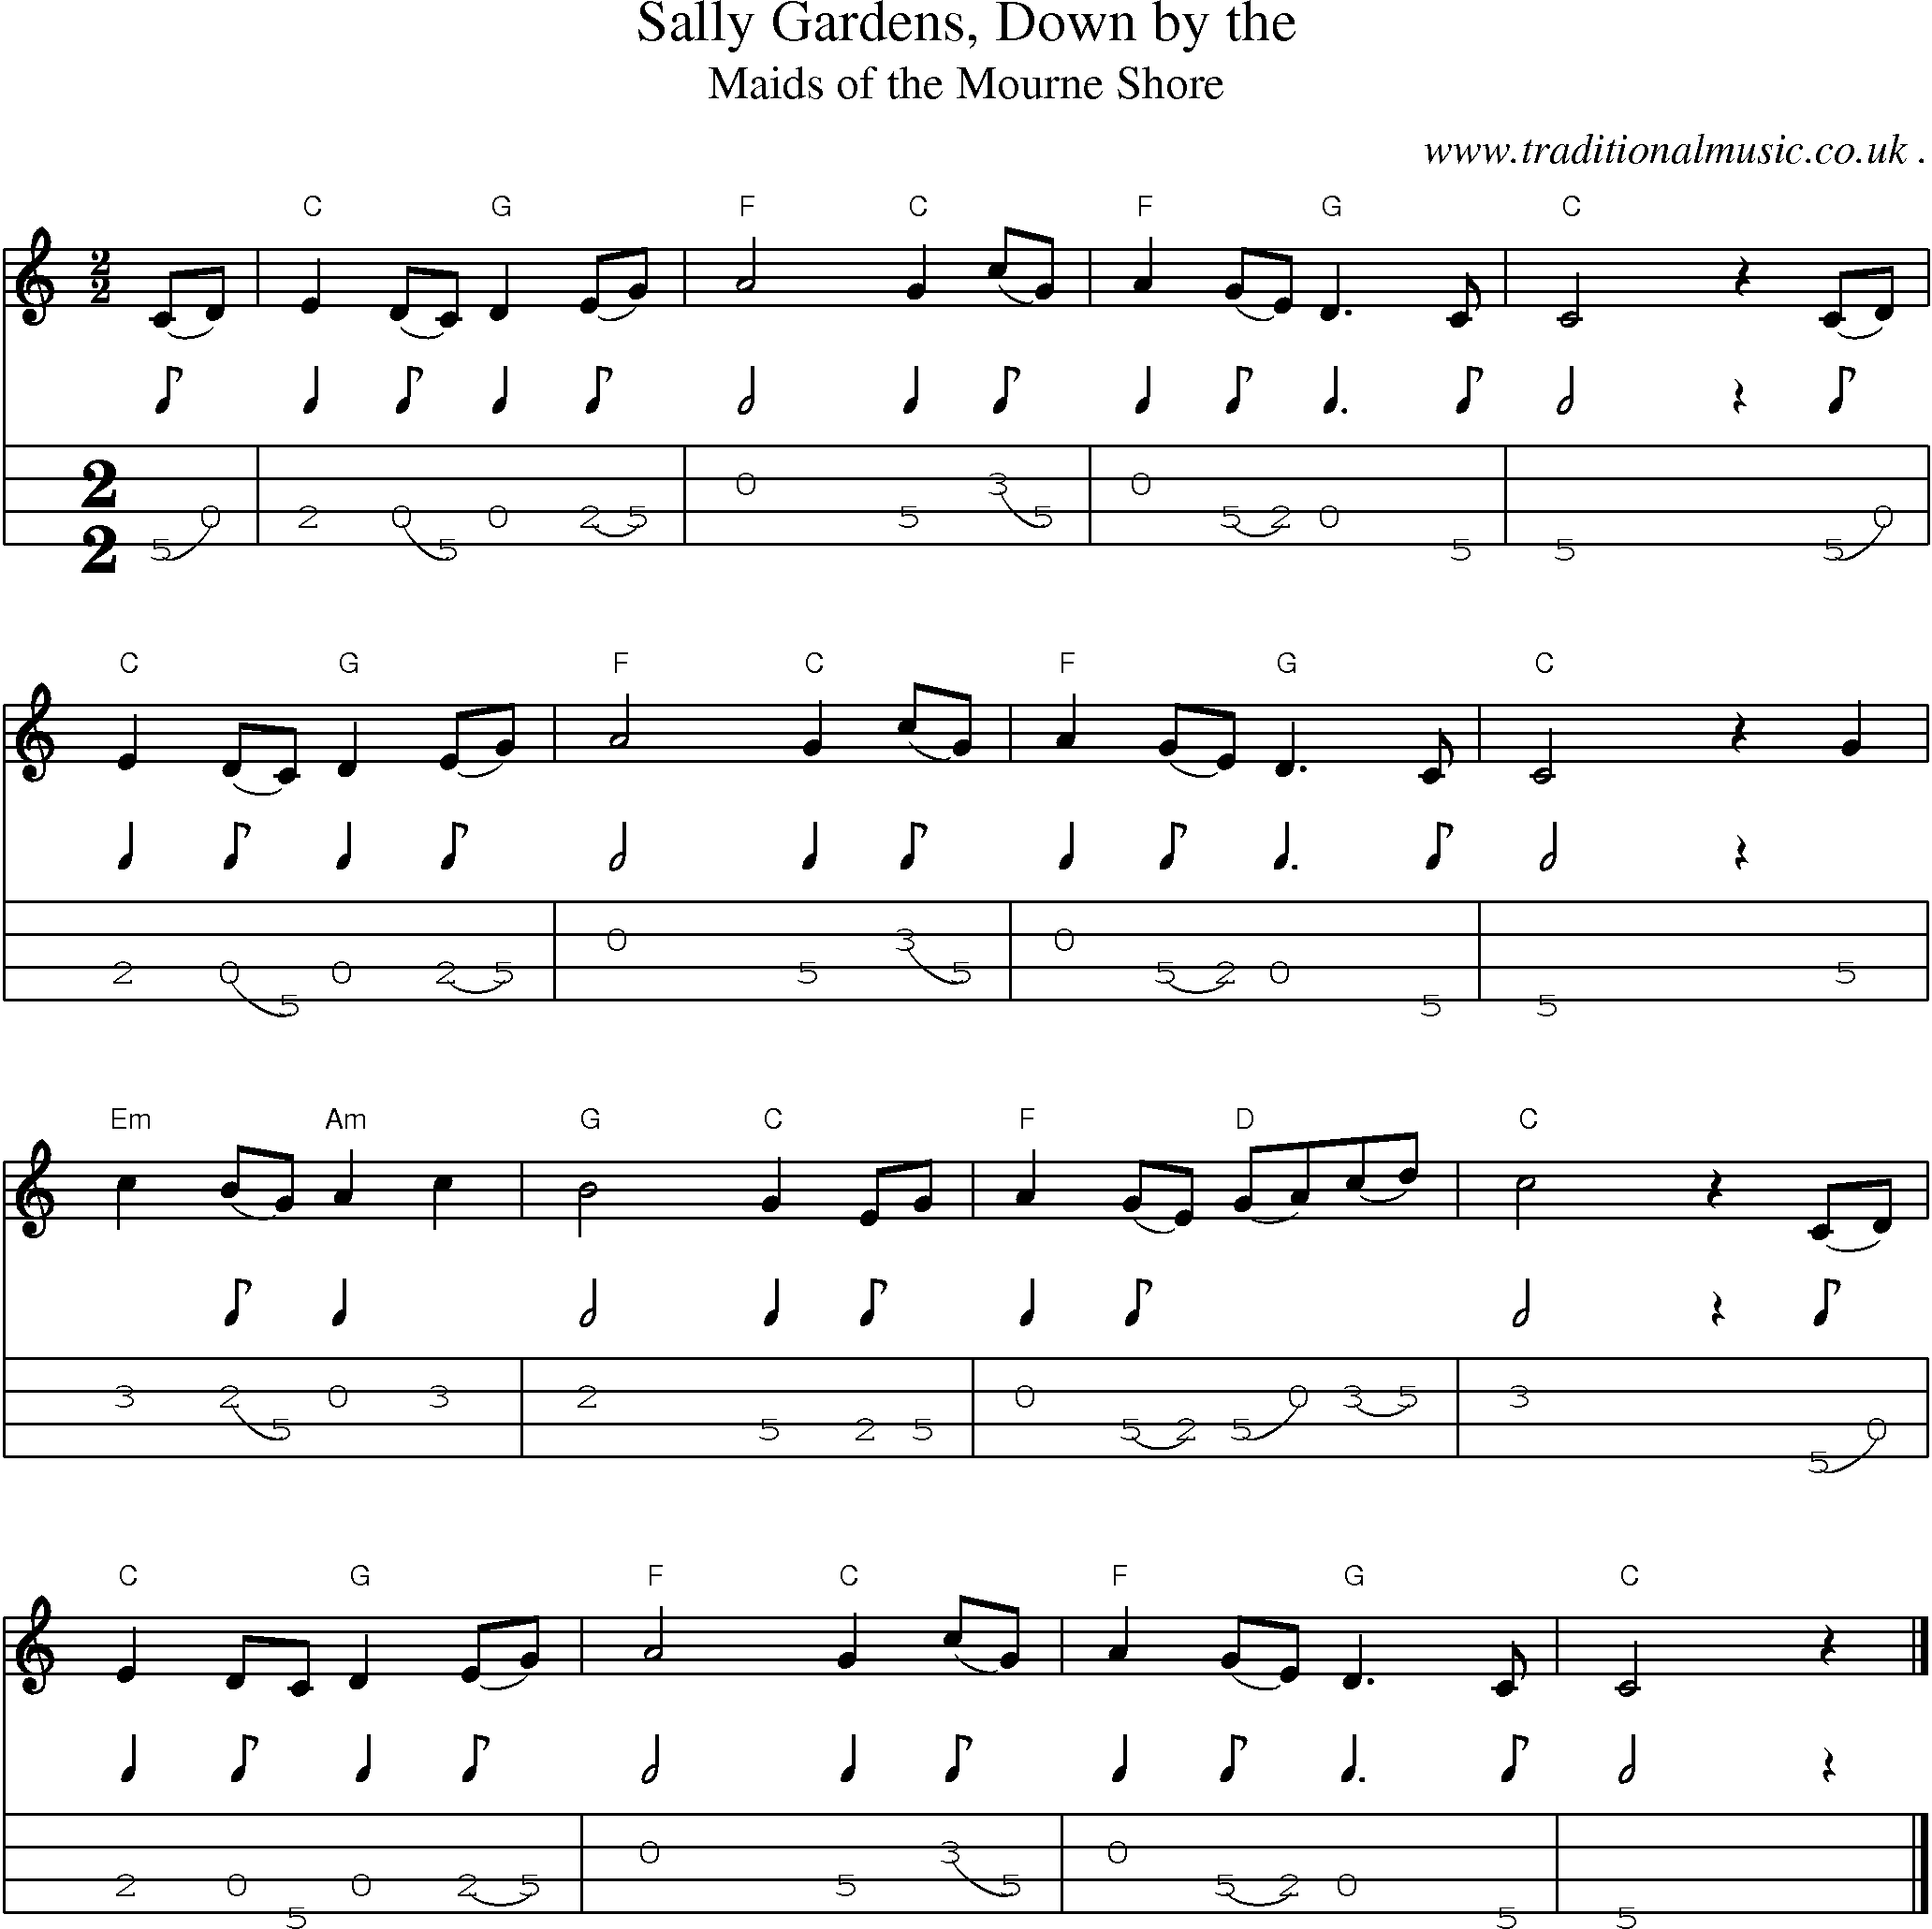 Music Score and Guitar Tabs for Sally Gardens Down by the